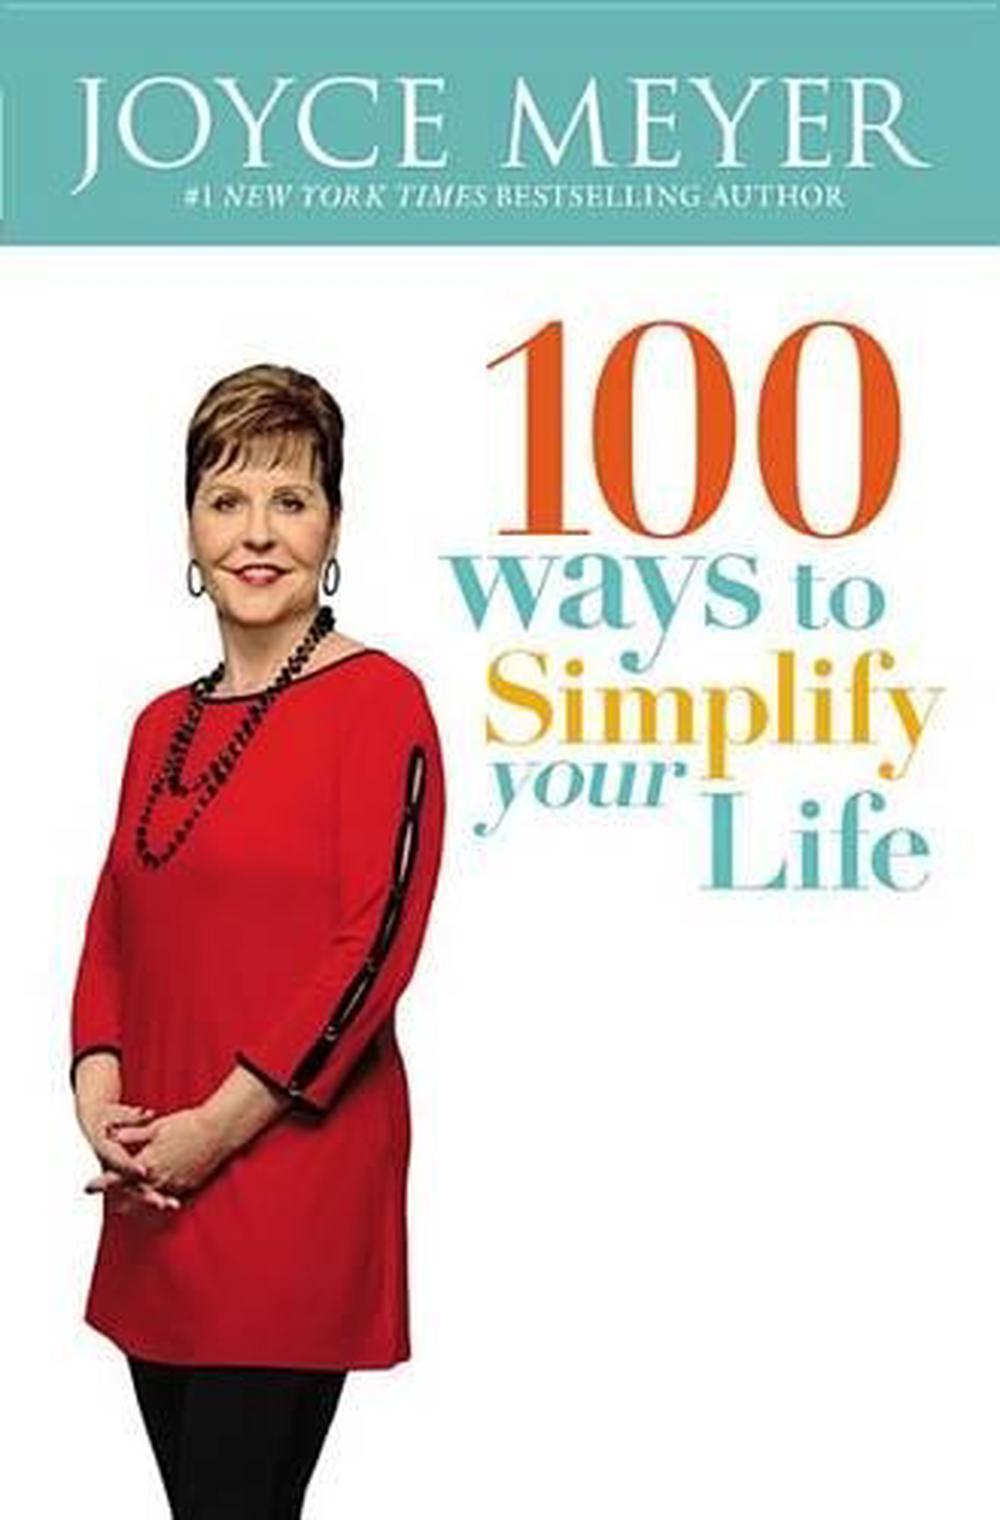 100 Ways to Simplify Your Life by Joyce Meyer (English) Paperback Book